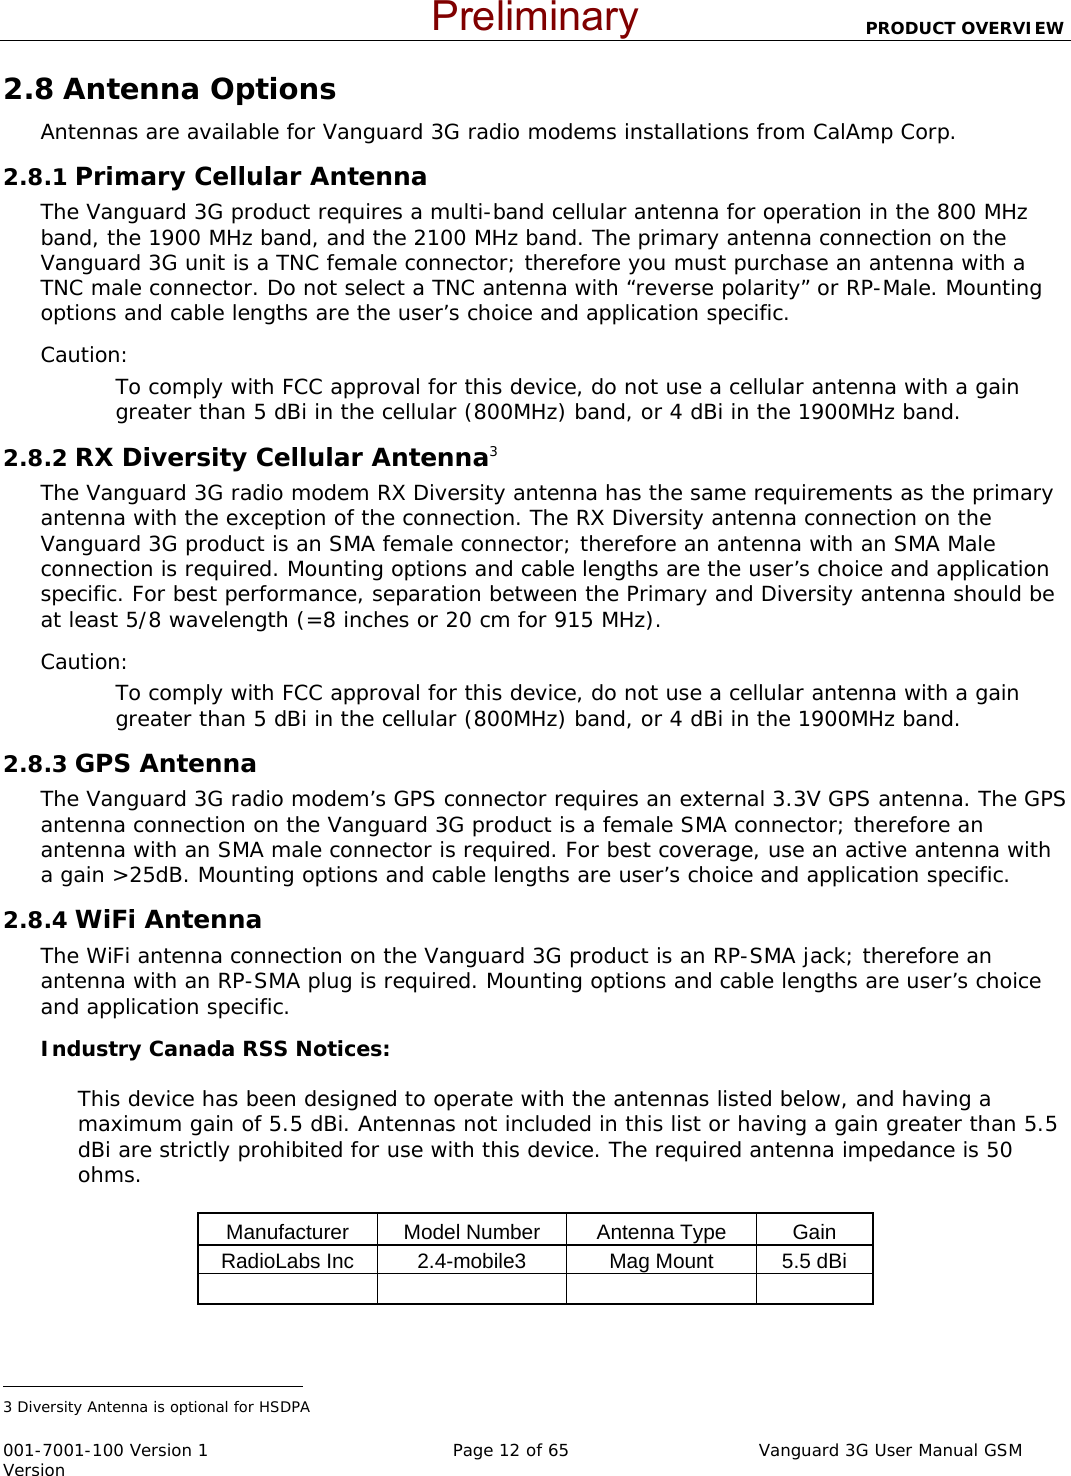                          PRODUCT OVERVIEW  001-7001-100 Version 1       Page 12 of 65       Vanguard 3G User Manual GSM Version 2.8 Antenna Options Antennas are available for Vanguard 3G radio modems installations from CalAmp Corp.  2.8.1 Primary Cellular Antenna The Vanguard 3G product requires a multi-band cellular antenna for operation in the 800 MHz band, the 1900 MHz band, and the 2100 MHz band. The primary antenna connection on the Vanguard 3G unit is a TNC female connector; therefore you must purchase an antenna with a TNC male connector. Do not select a TNC antenna with “reverse polarity” or RP-Male. Mounting options and cable lengths are the user’s choice and application specific. Caution: To comply with FCC approval for this device, do not use a cellular antenna with a gain greater than 5 dBi in the cellular (800MHz) band, or 4 dBi in the 1900MHz band.   2.8.2 RX Diversity Cellular Antenna3 The Vanguard 3G radio modem RX Diversity antenna has the same requirements as the primary antenna with the exception of the connection. The RX Diversity antenna connection on the Vanguard 3G product is an SMA female connector; therefore an antenna with an SMA Male connection is required. Mounting options and cable lengths are the user’s choice and application specific. For best performance, separation between the Primary and Diversity antenna should be at least 5/8 wavelength (=8 inches or 20 cm for 915 MHz).   Caution: To comply with FCC approval for this device, do not use a cellular antenna with a gain greater than 5 dBi in the cellular (800MHz) band, or 4 dBi in the 1900MHz band.   2.8.3 GPS Antenna The Vanguard 3G radio modem’s GPS connector requires an external 3.3V GPS antenna. The GPS antenna connection on the Vanguard 3G product is a female SMA connector; therefore an antenna with an SMA male connector is required. For best coverage, use an active antenna with a gain &gt;25dB. Mounting options and cable lengths are user’s choice and application specific. 2.8.4 WiFi Antenna The WiFi antenna connection on the Vanguard 3G product is an RP-SMA jack; therefore an antenna with an RP-SMA plug is required. Mounting options and cable lengths are user’s choice and application specific. Industry Canada RSS Notices:   This device has been designed to operate with the antennas listed below, and having a maximum gain of 5.5 dBi. Antennas not included in this list or having a gain greater than 5.5 dBi are strictly prohibited for use with this device. The required antenna impedance is 50 ohms.  Manufacturer  Model Number  Antenna Type   Gain RadioLabs Inc  2.4-mobile3  Mag Mount  5.5 dBi                                                              3 Diversity Antenna is optional for HSDPA  Preliminary